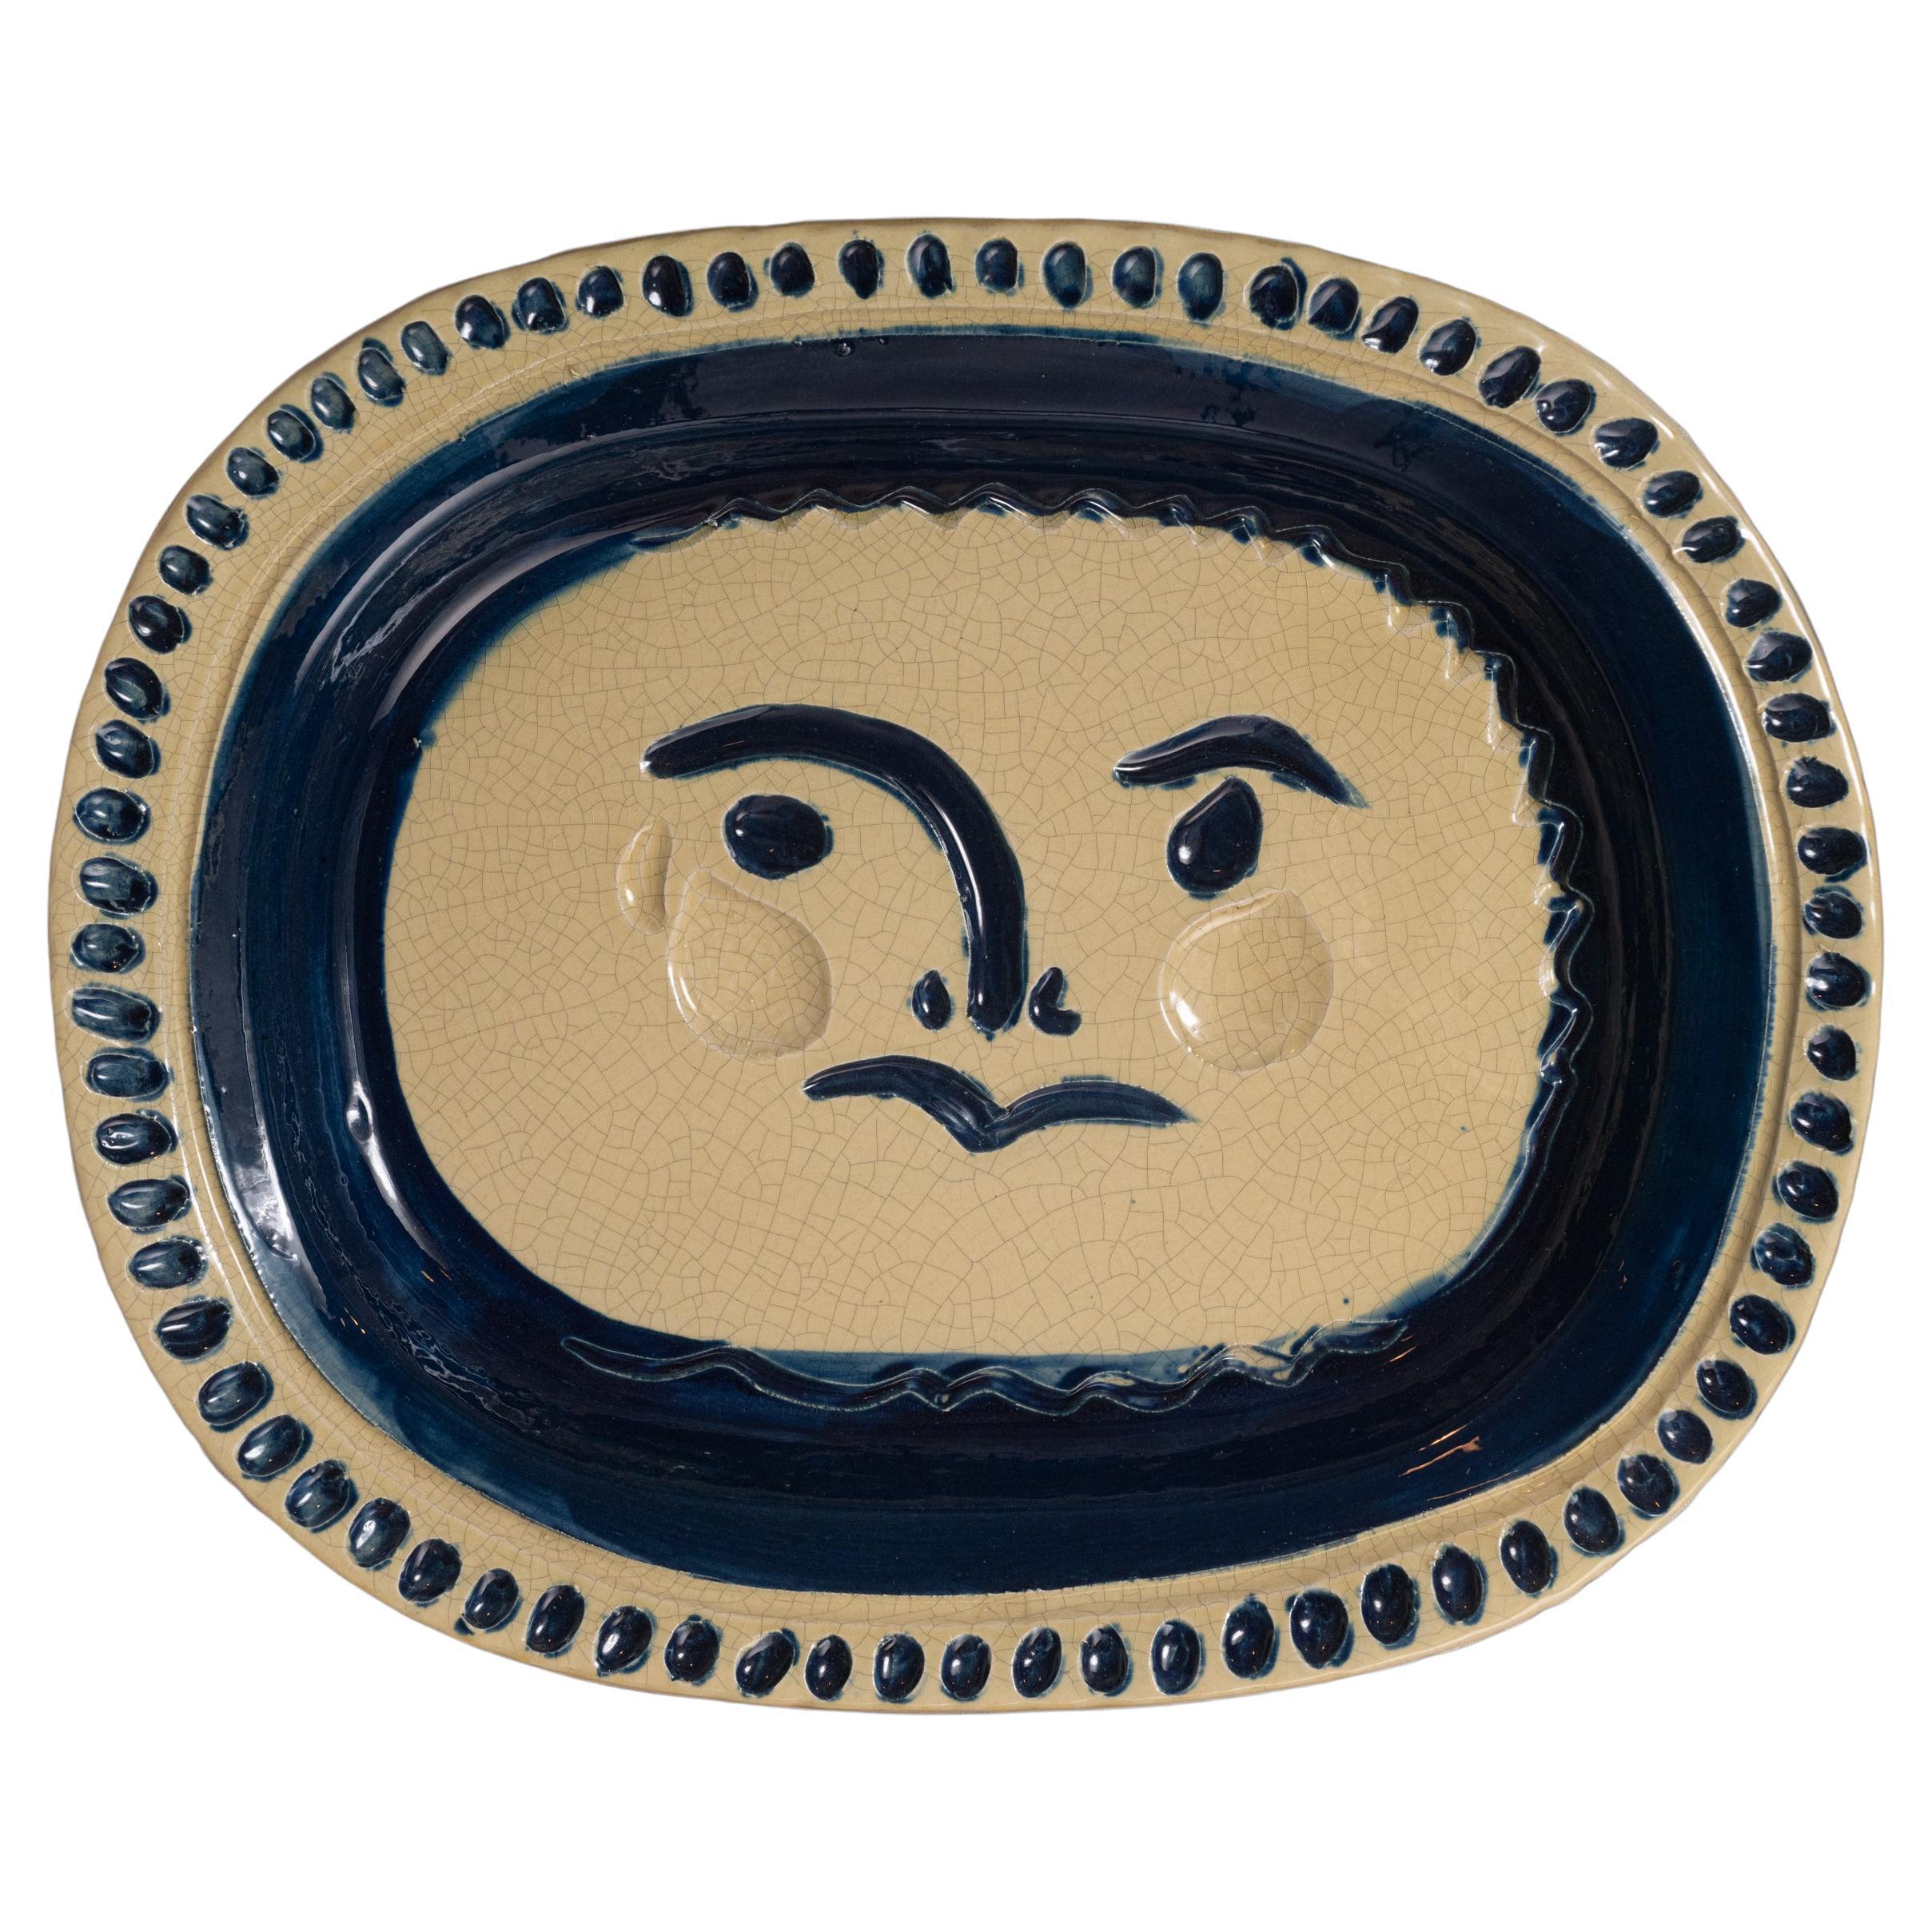 Engraved Face Plate by Pablo Picasso for Madoura